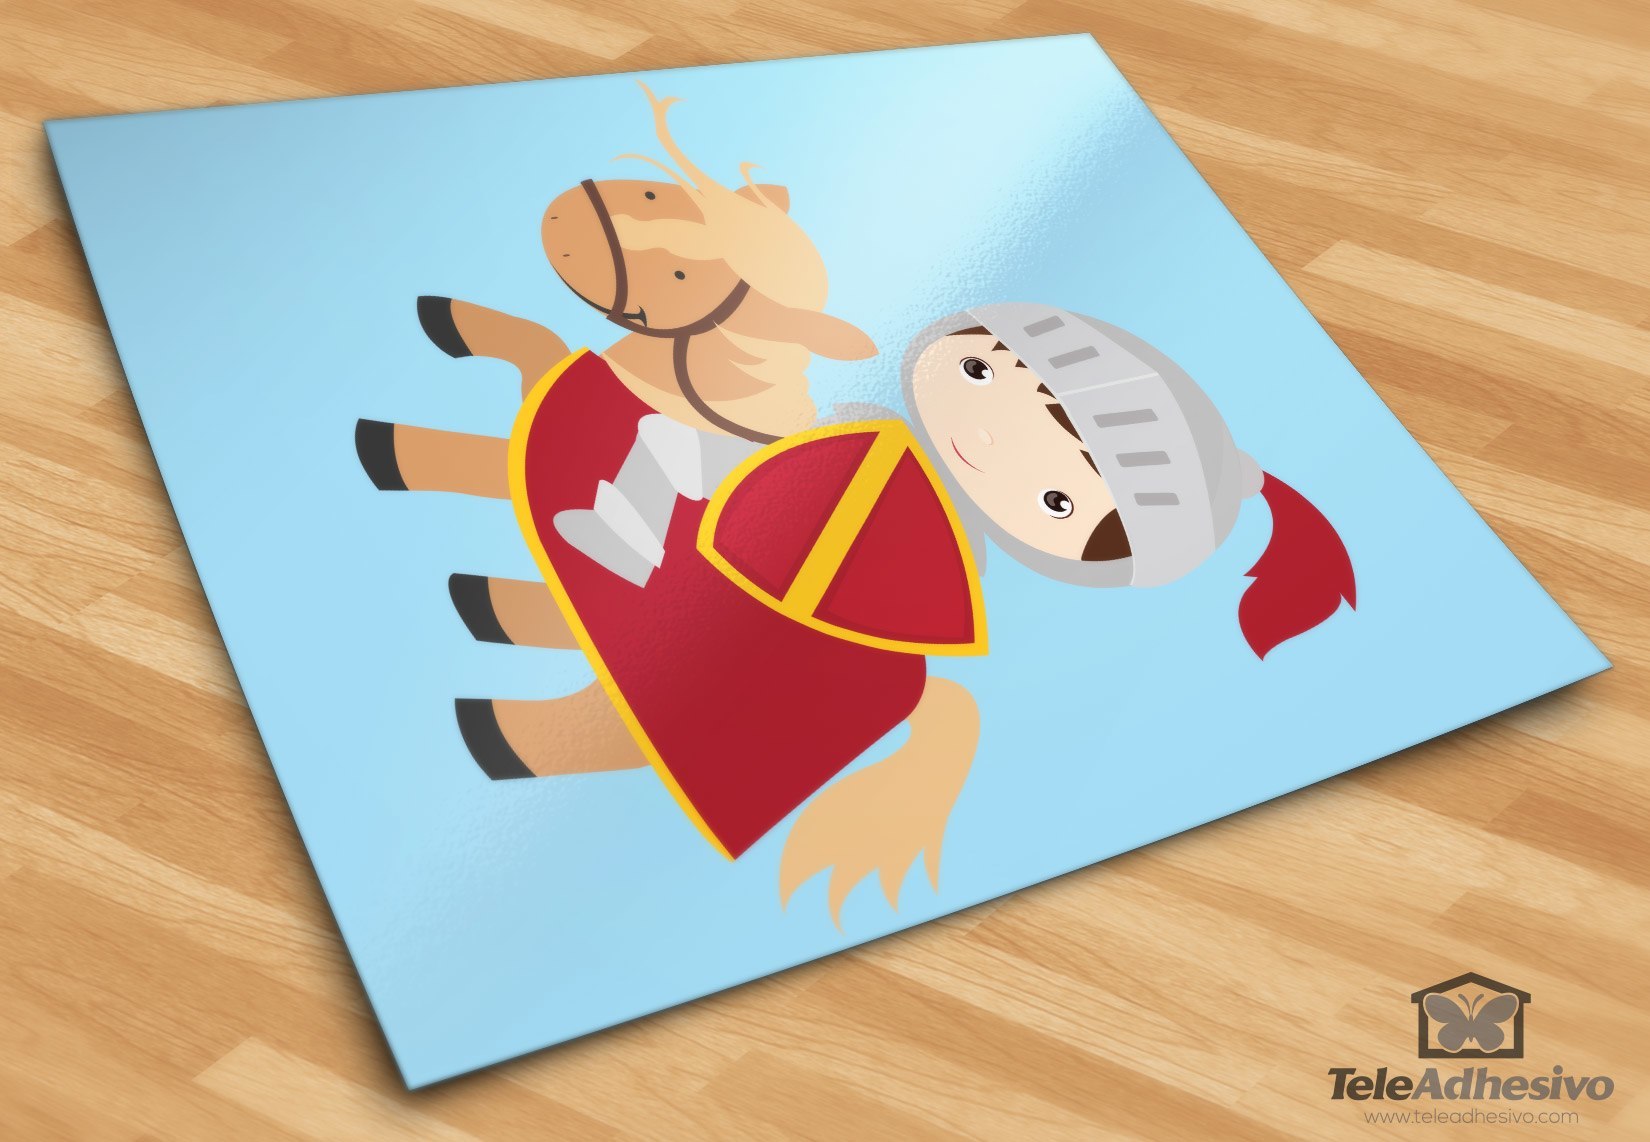 Stickers for Kids: Red Knight